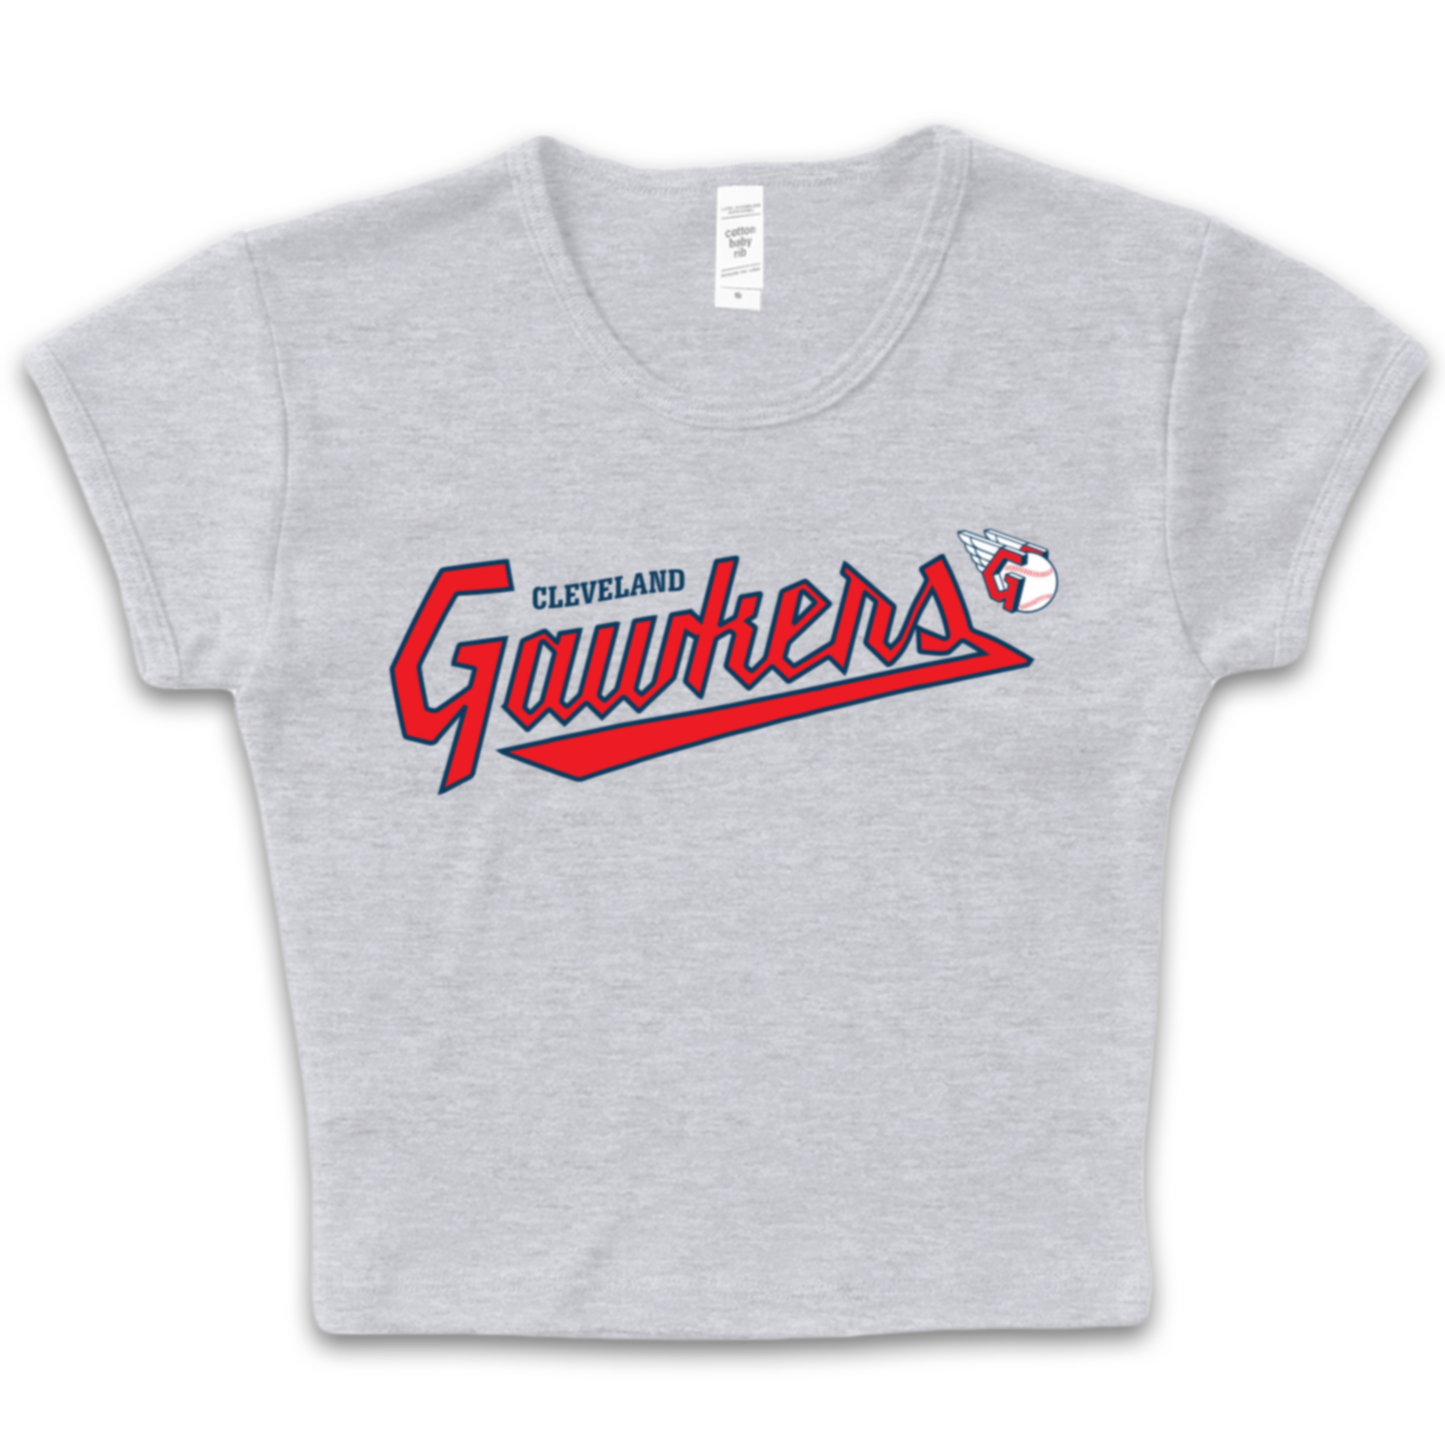 Cleveland Gawkers Baby Tee